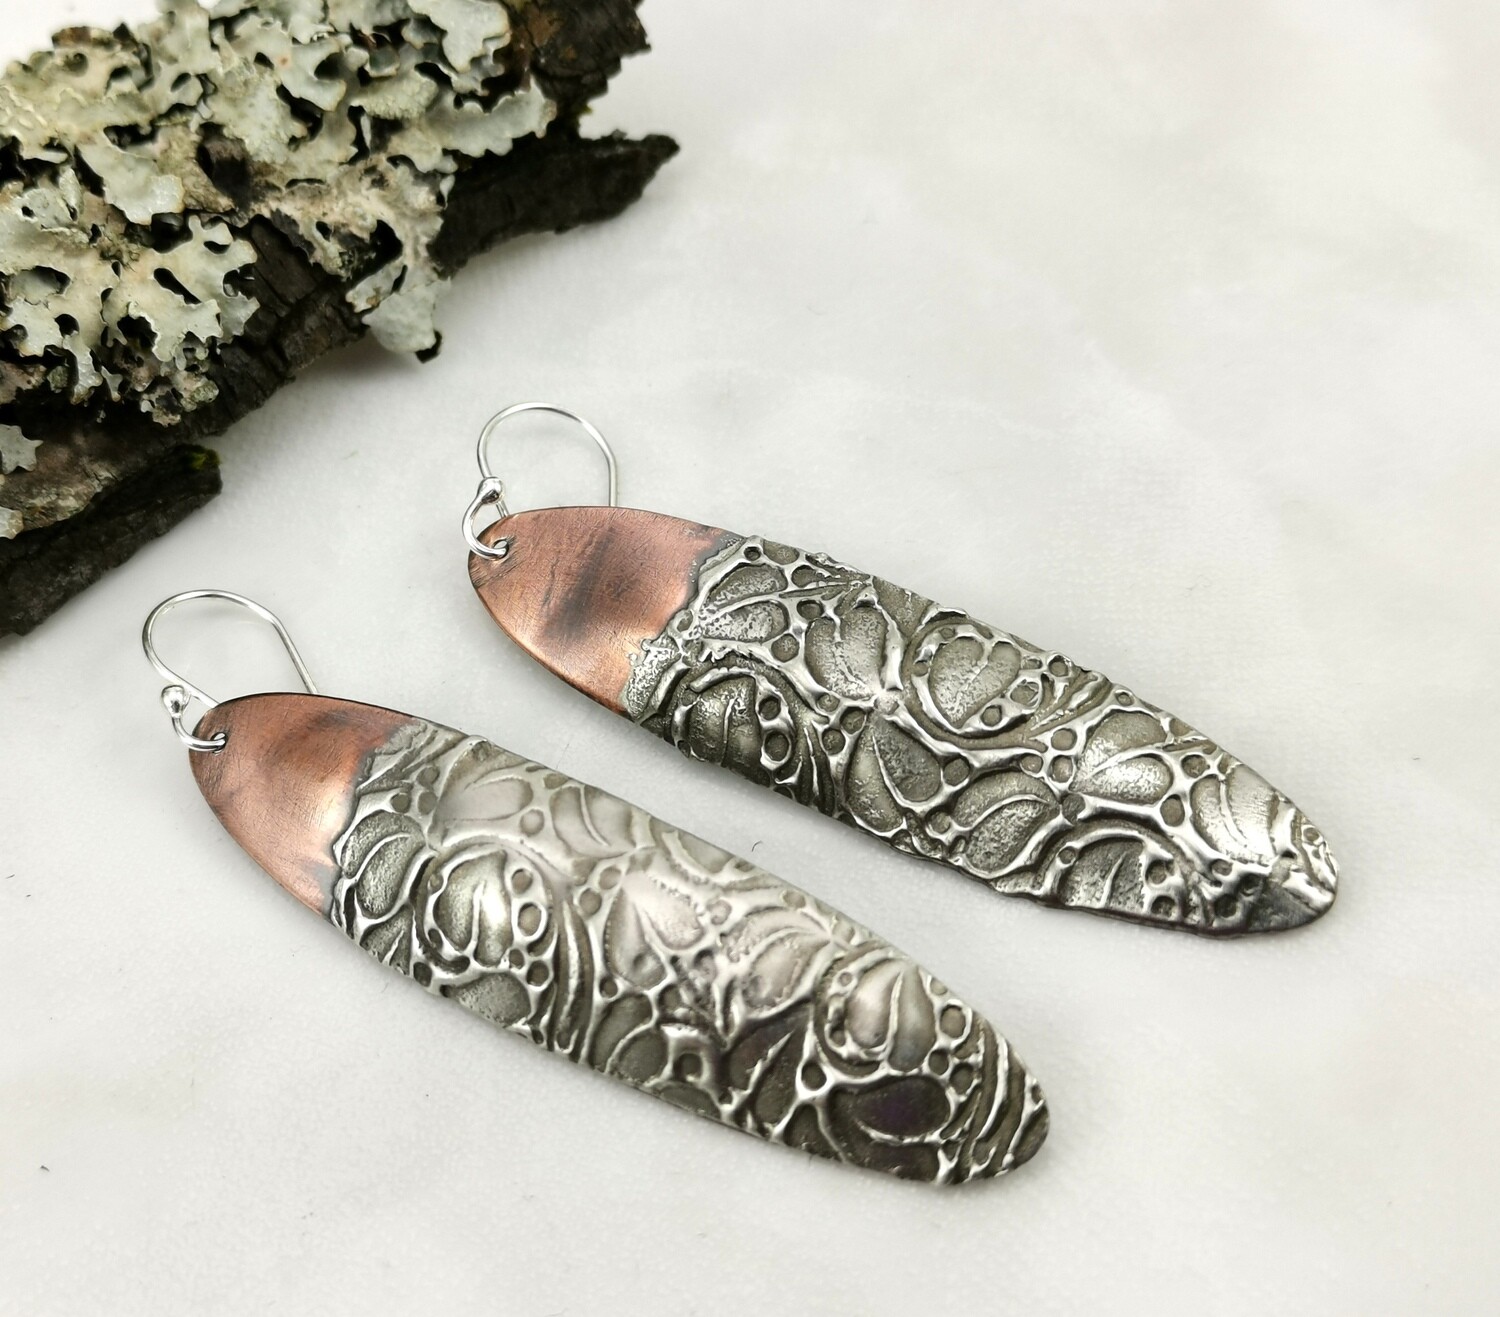 Gifts for Her, Oval Earrings, Oval Jewelry, Mixed Metal Jewelry, Mixed Metal Earrings, Copper Jewelry, Textured Solder Earrings,